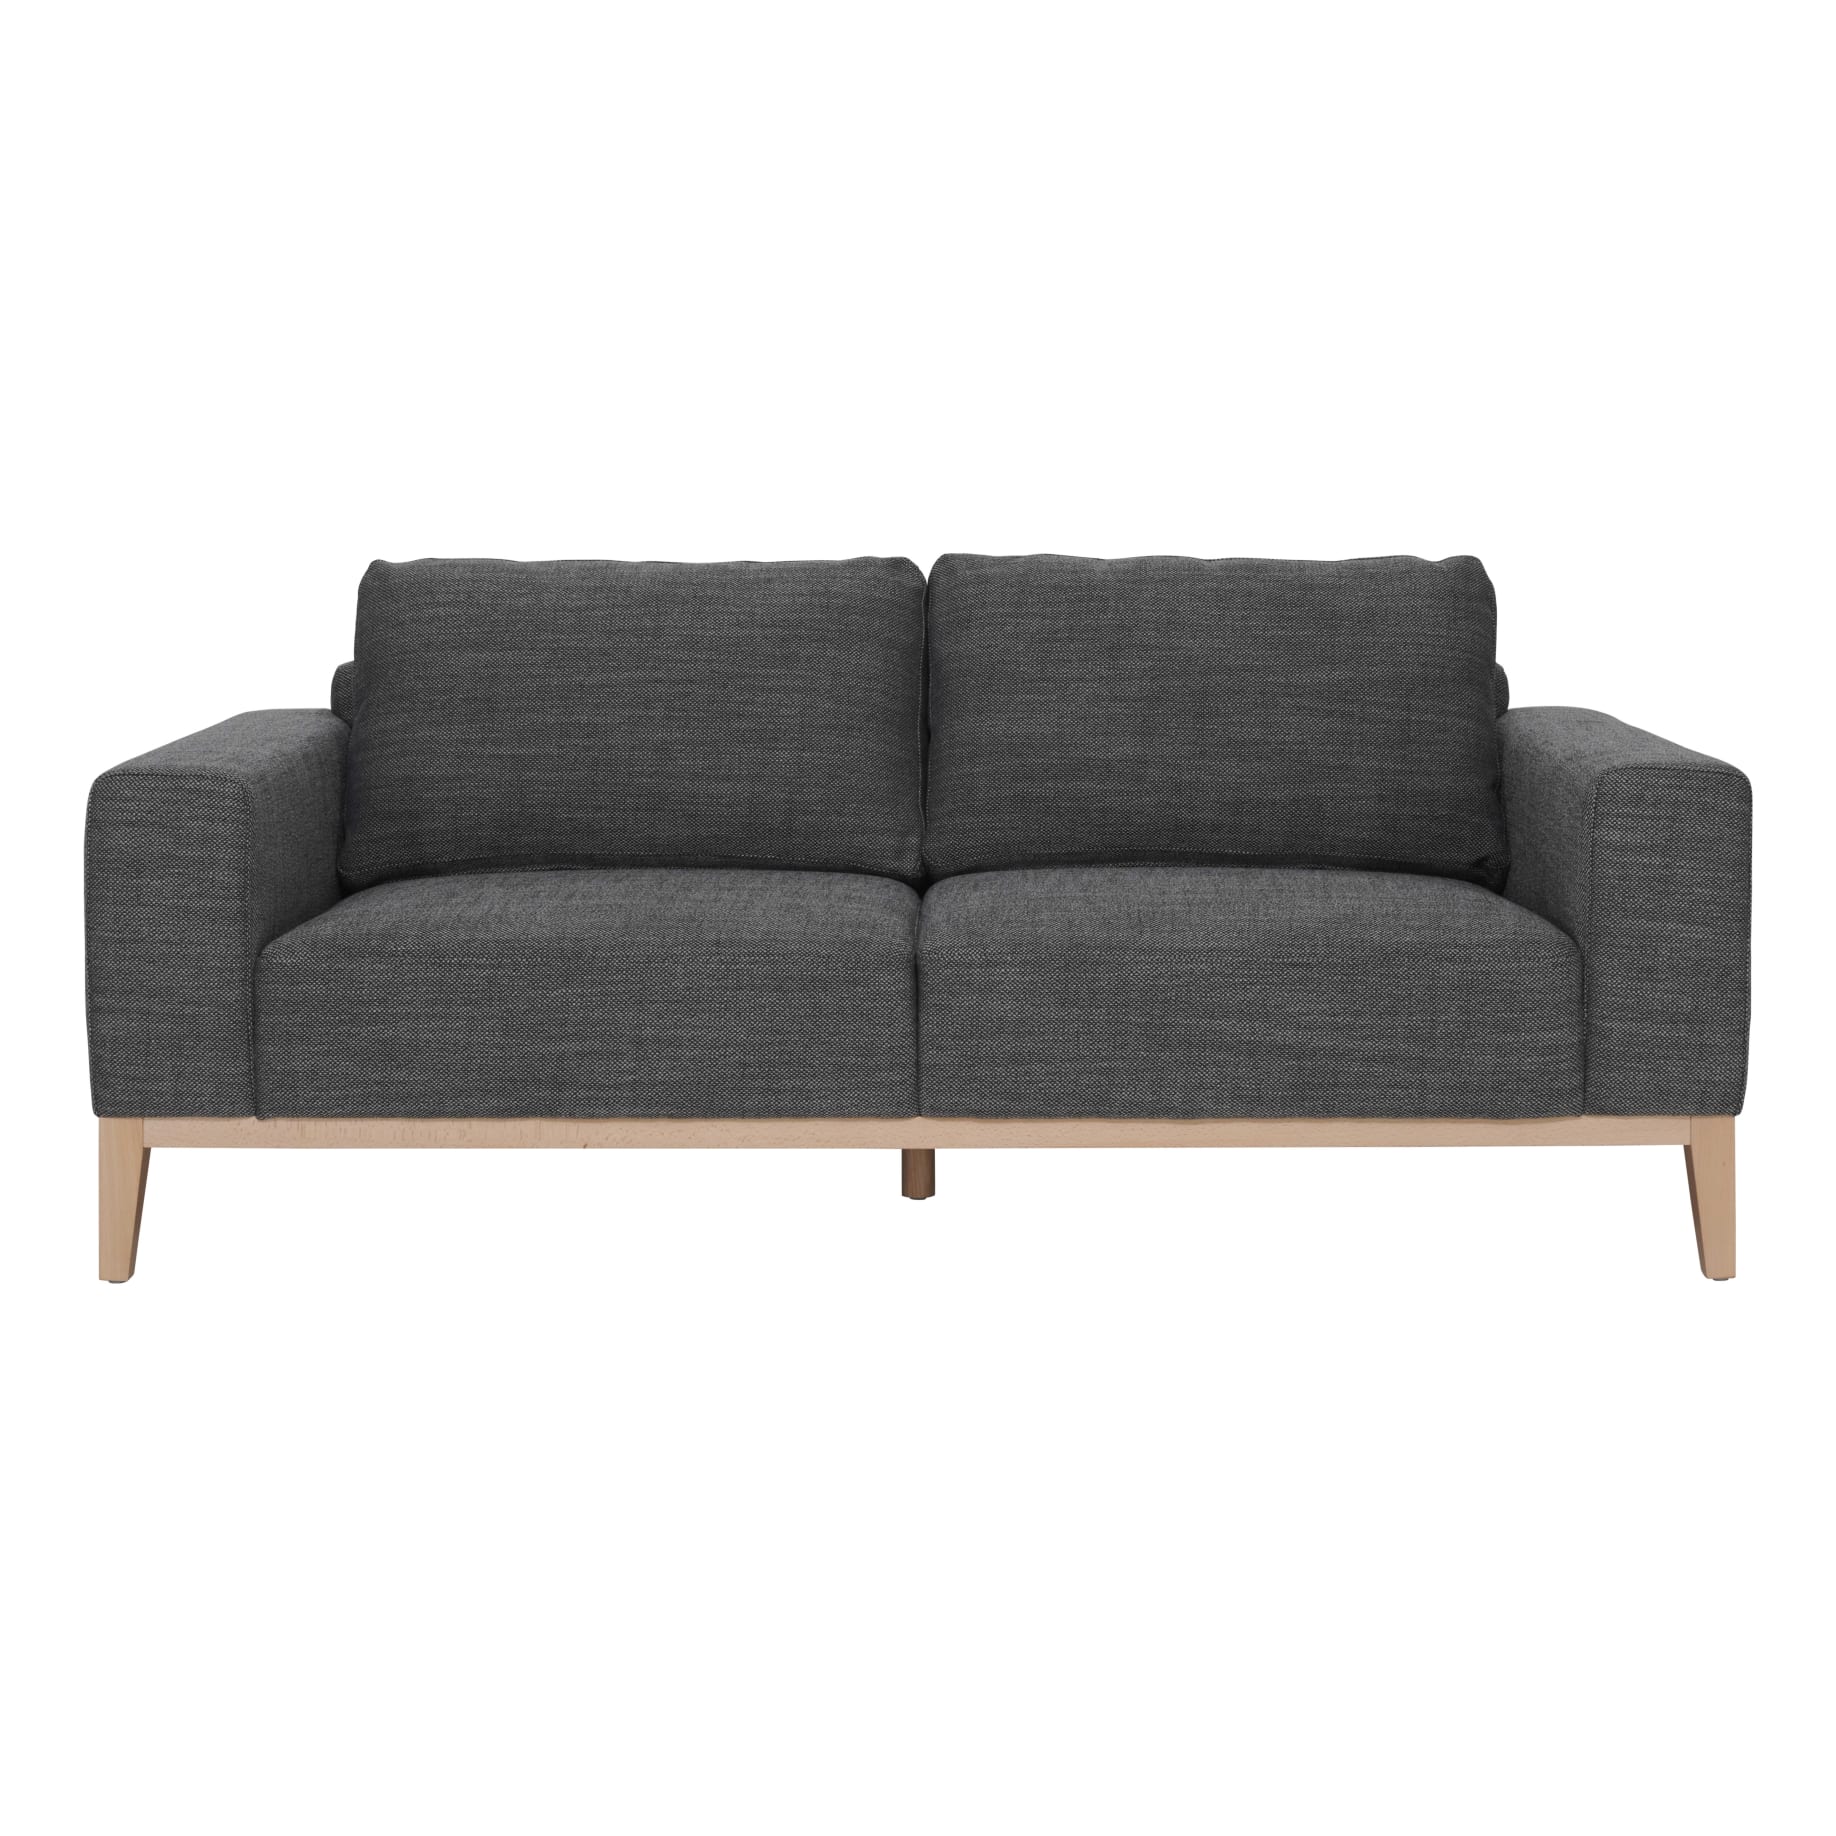 Moana 3 Seater in Kind Charcoal